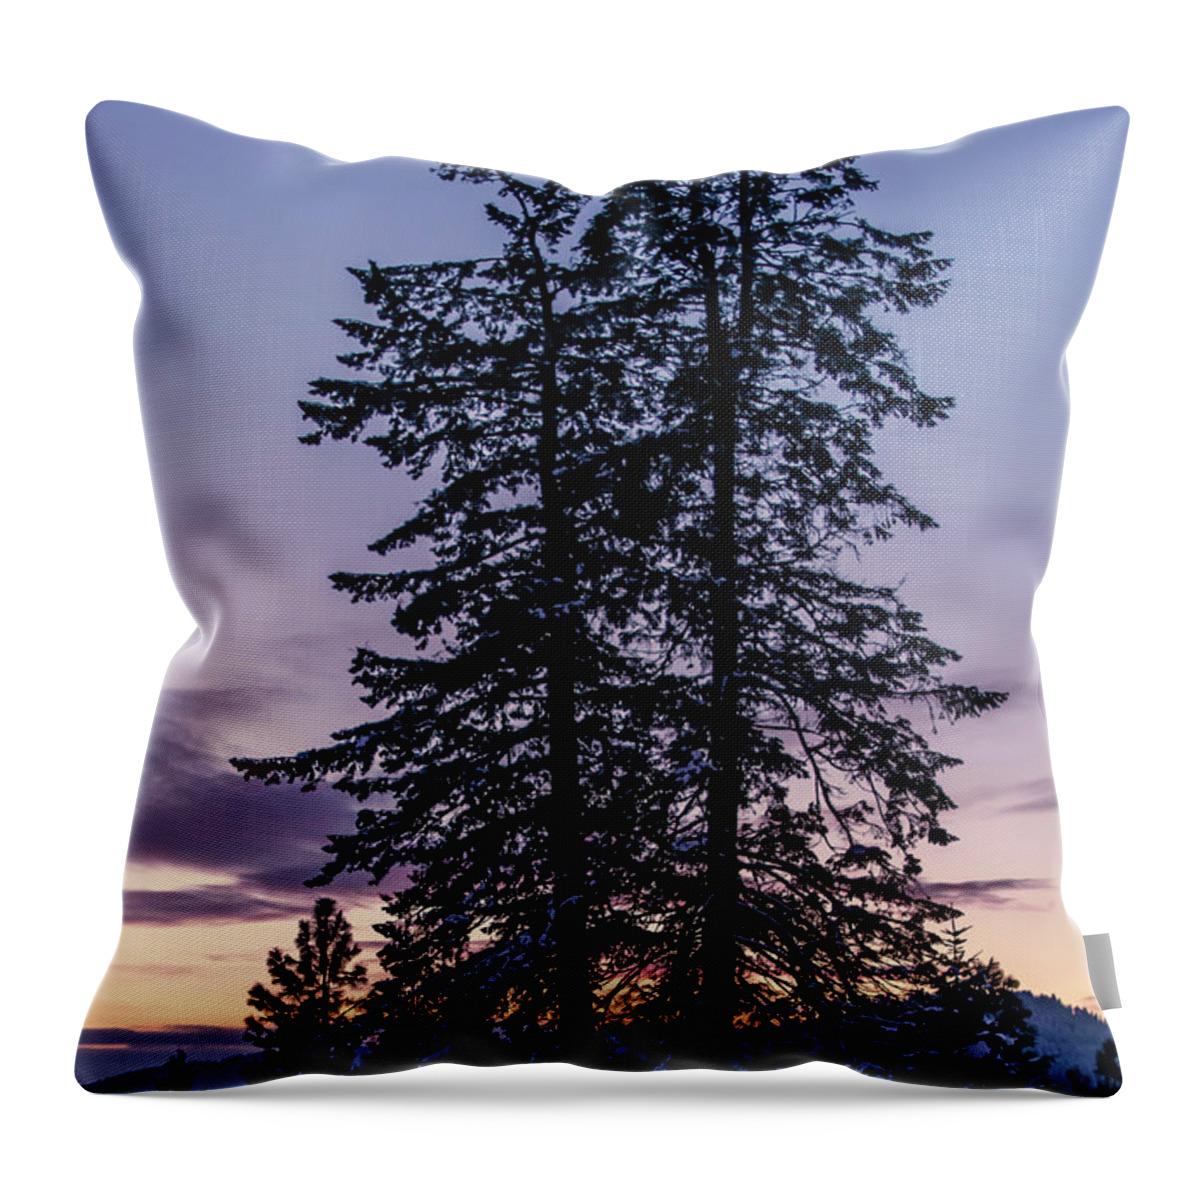 Landscape Throw Pillow featuring the photograph Pine Tree Silhouette  by Lester Plank